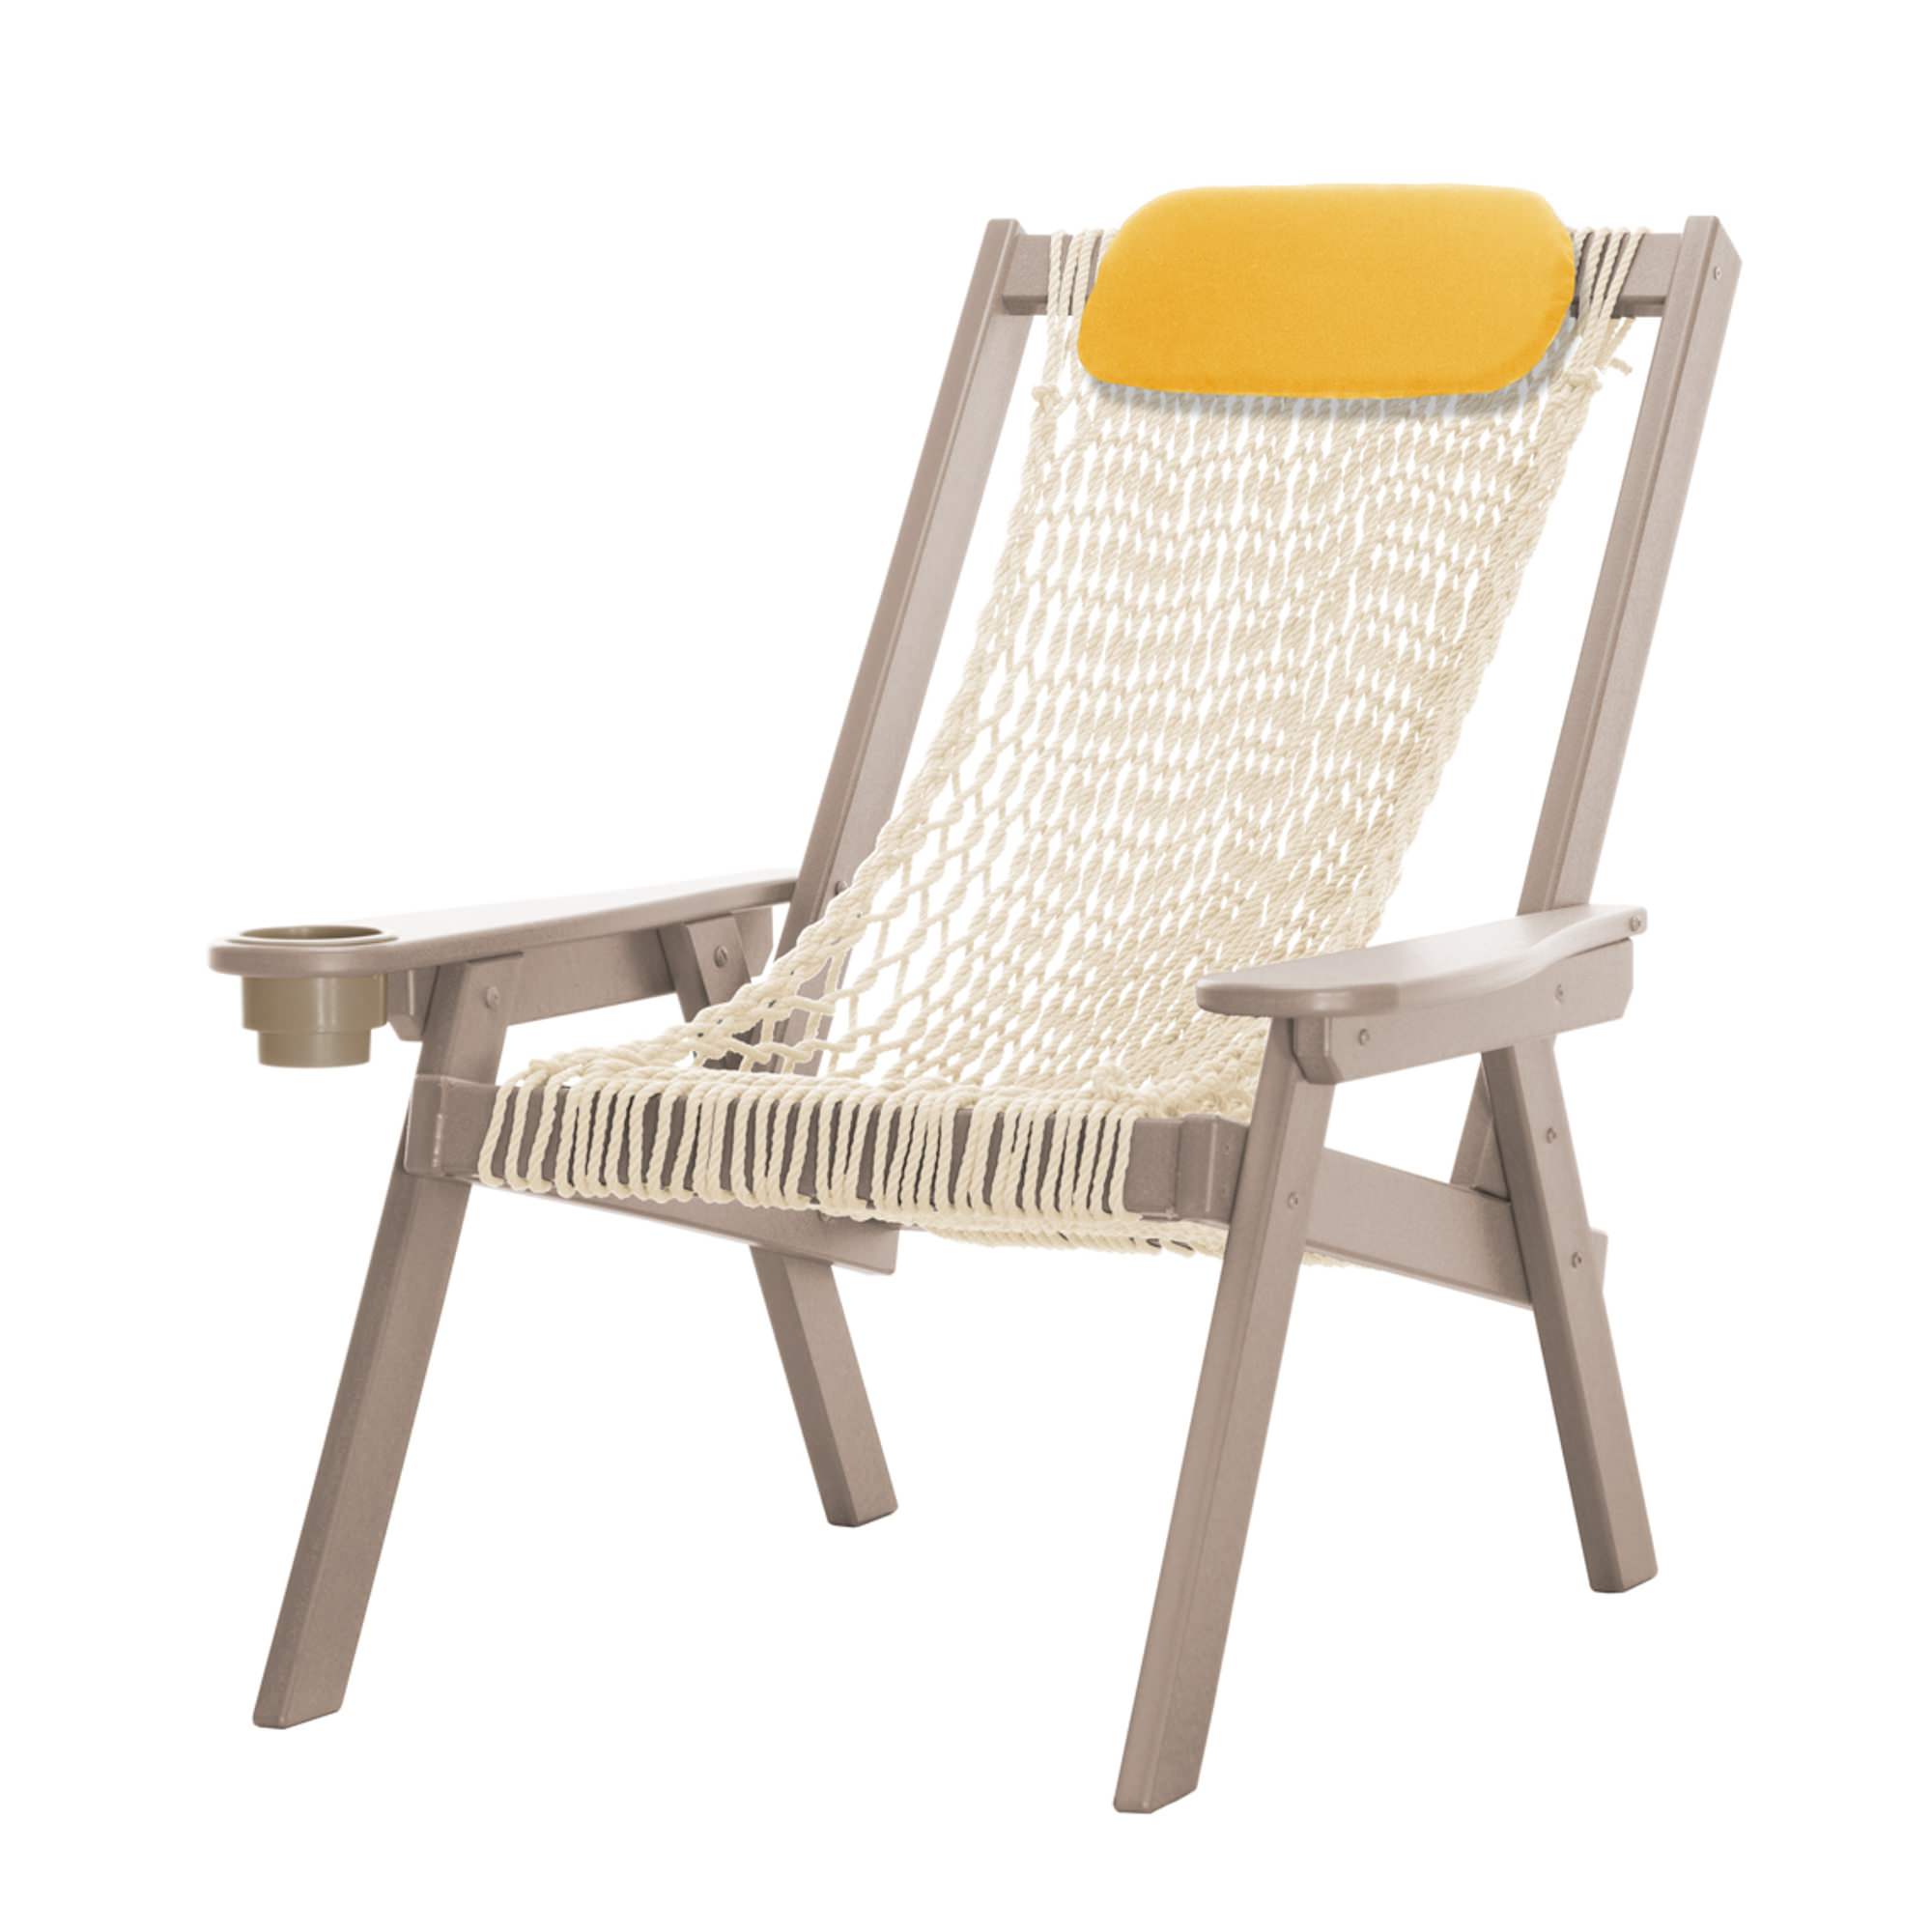 Coastal Rope Chair Instructions